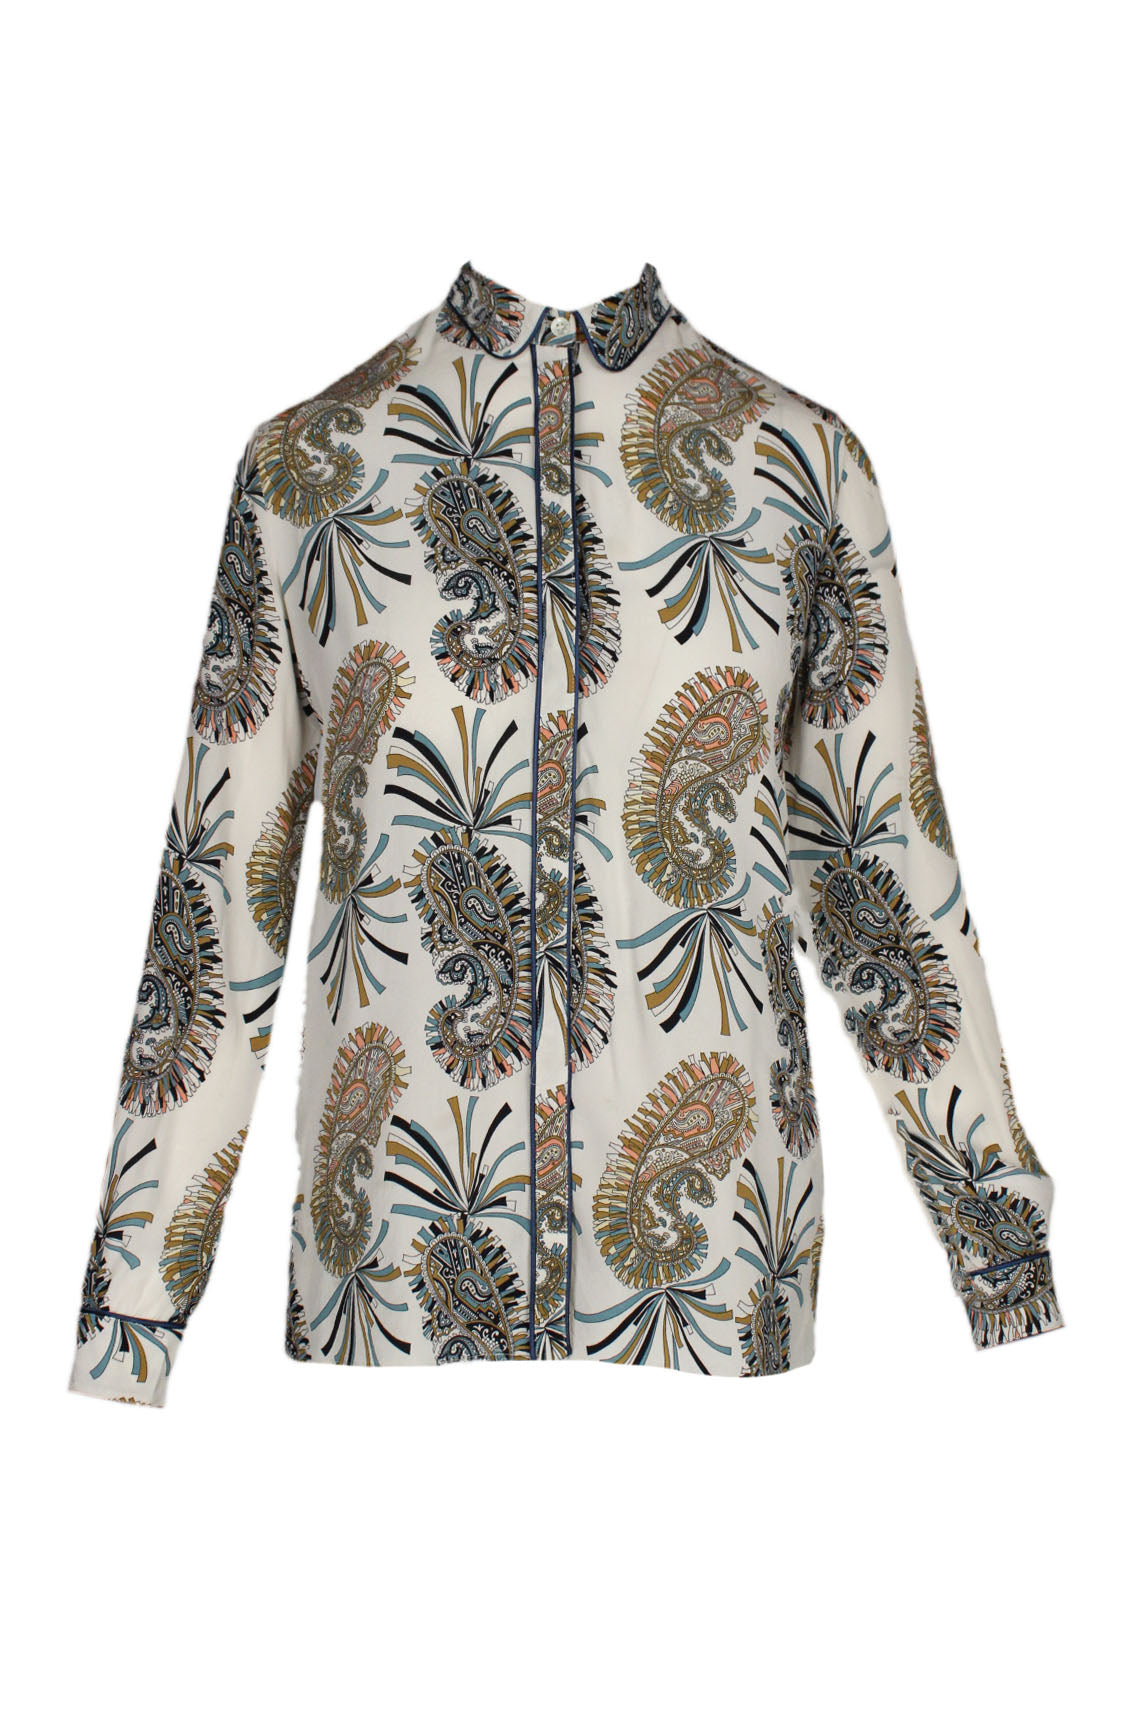 front of etro light grey printed silk long sleeve button-down blouse. abstract paisley allover print. blue piping trim detailing. concealed button-down front closure. buttoned sleeve cuffs. 